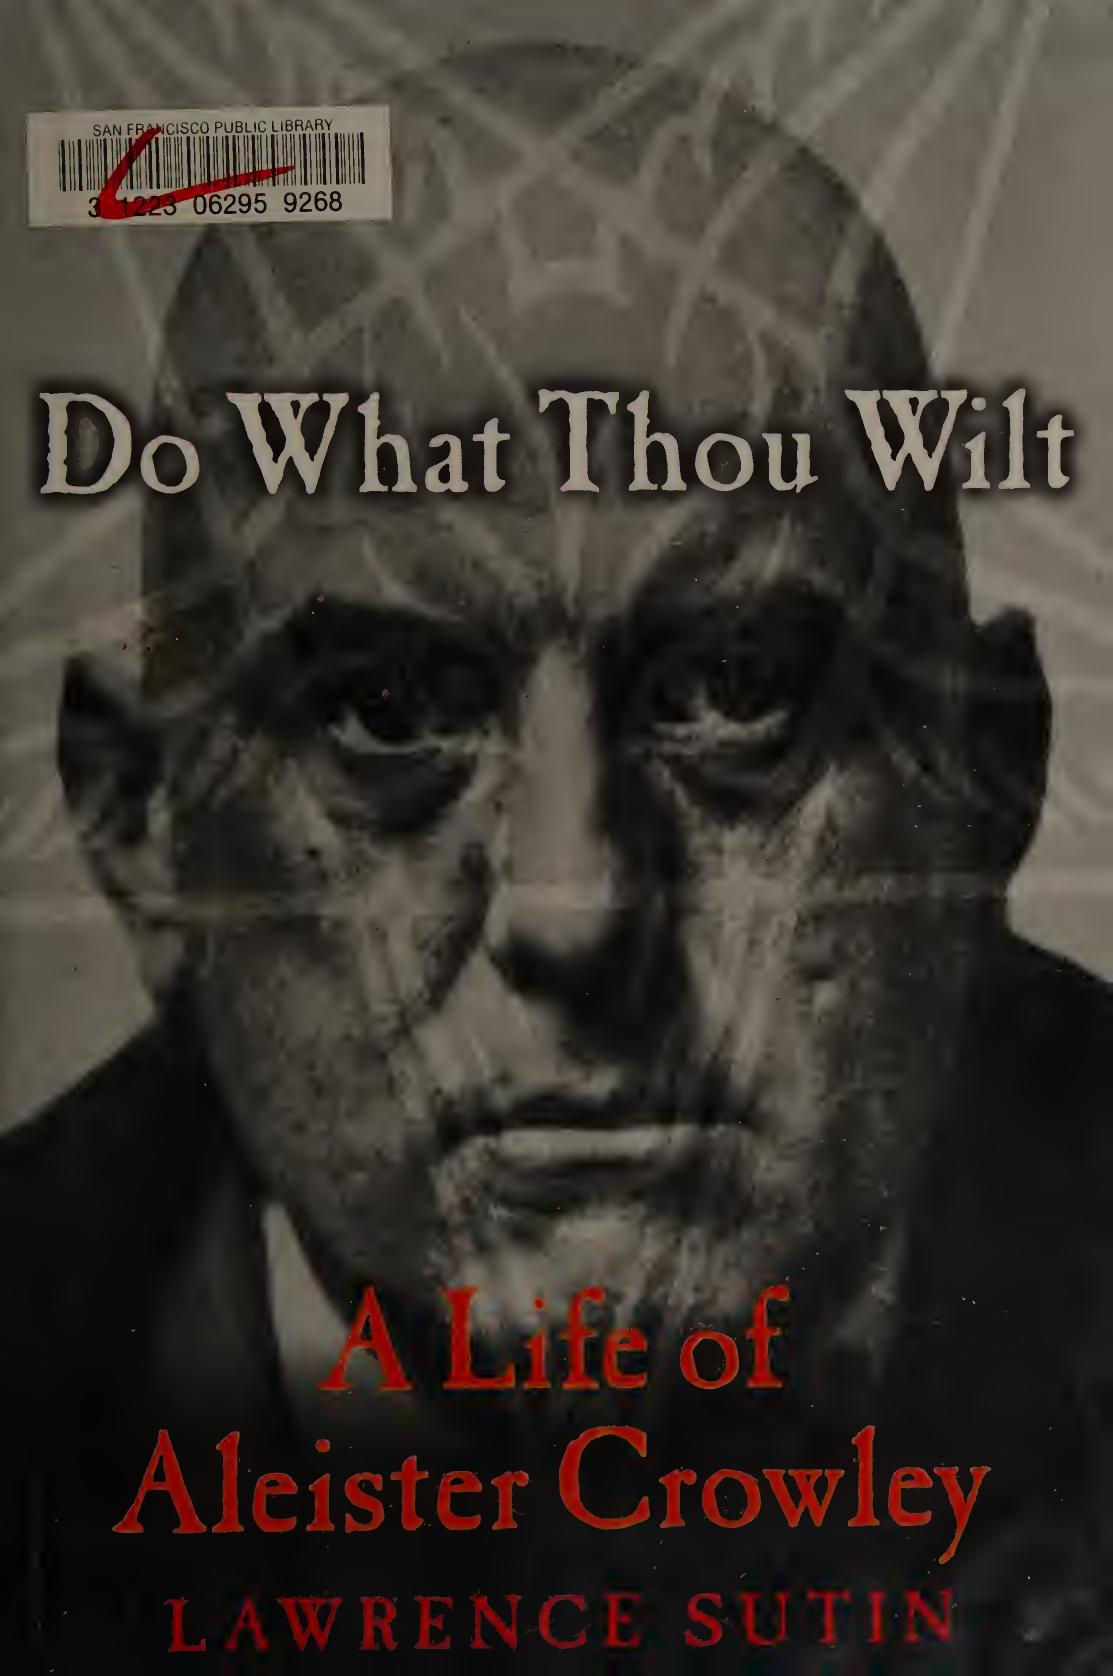 Do What Thou Wilt: A Life of Aleister Crowley by Lawrence Sutin